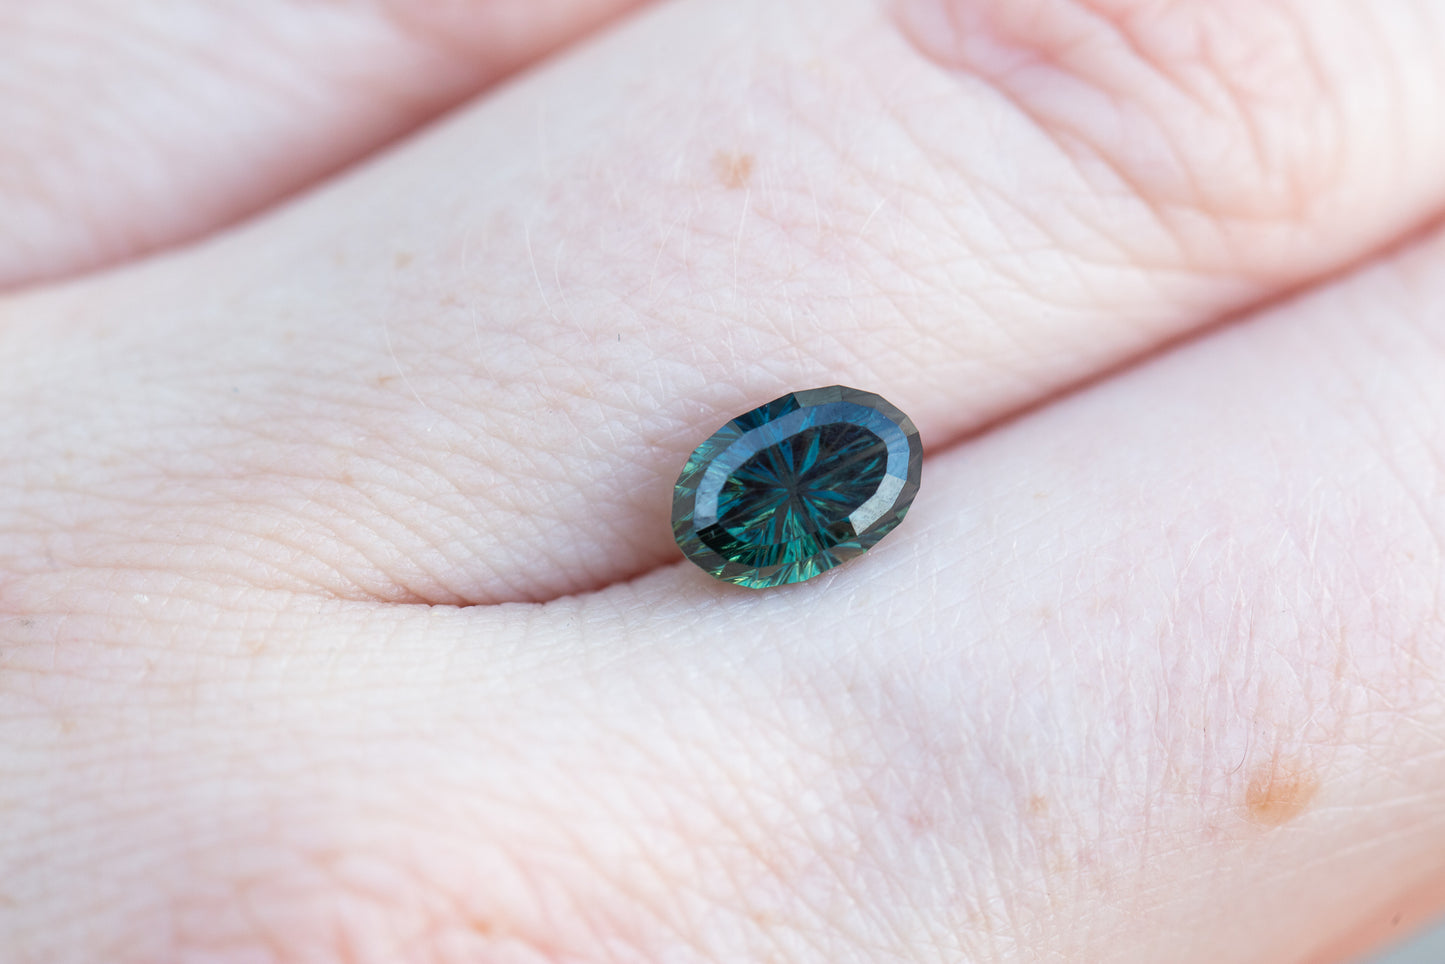 Load image into Gallery viewer, 1.92ct oval dark blue green sapphire - Starbrite cut by John Dyer
